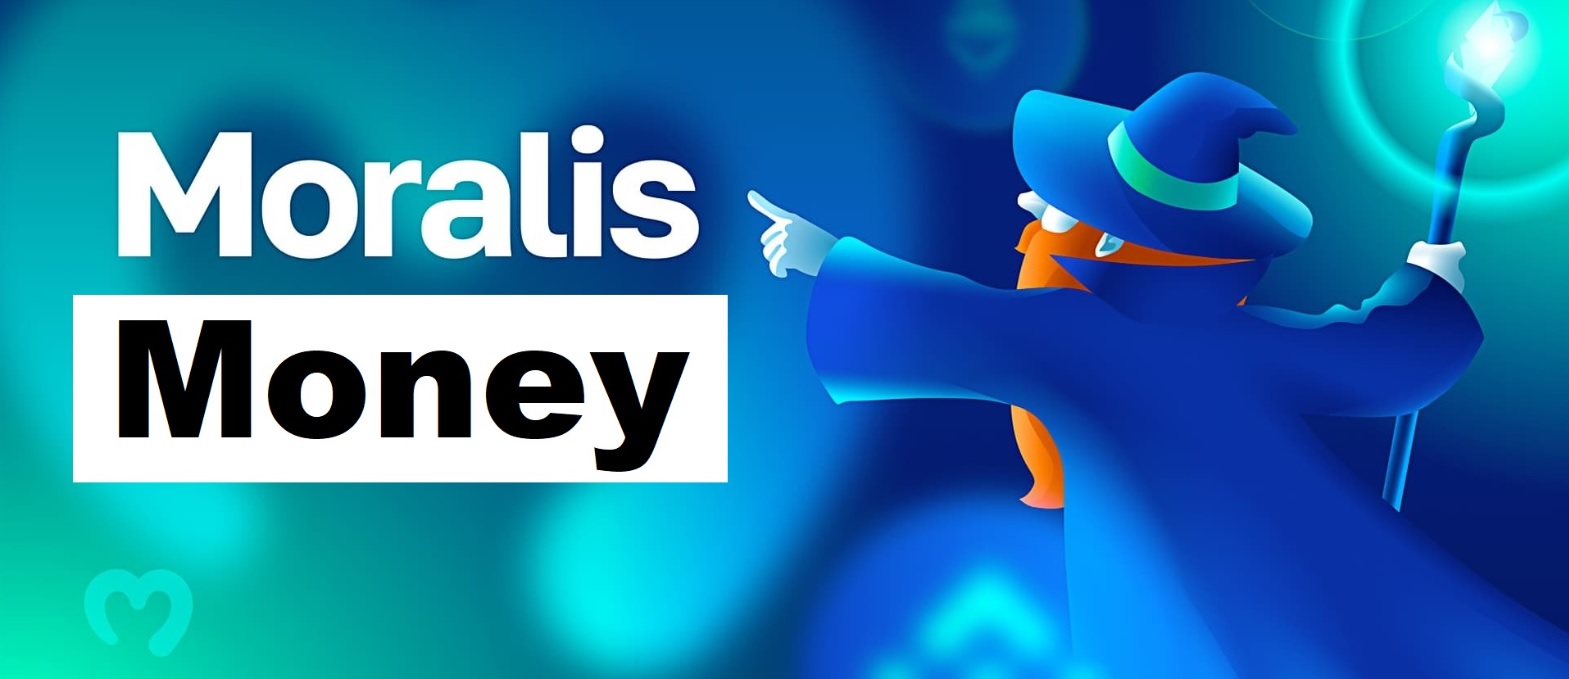 Moralis-Money-offers-on-chain-insights-for-alts-including-UNIBOT-crypto-token